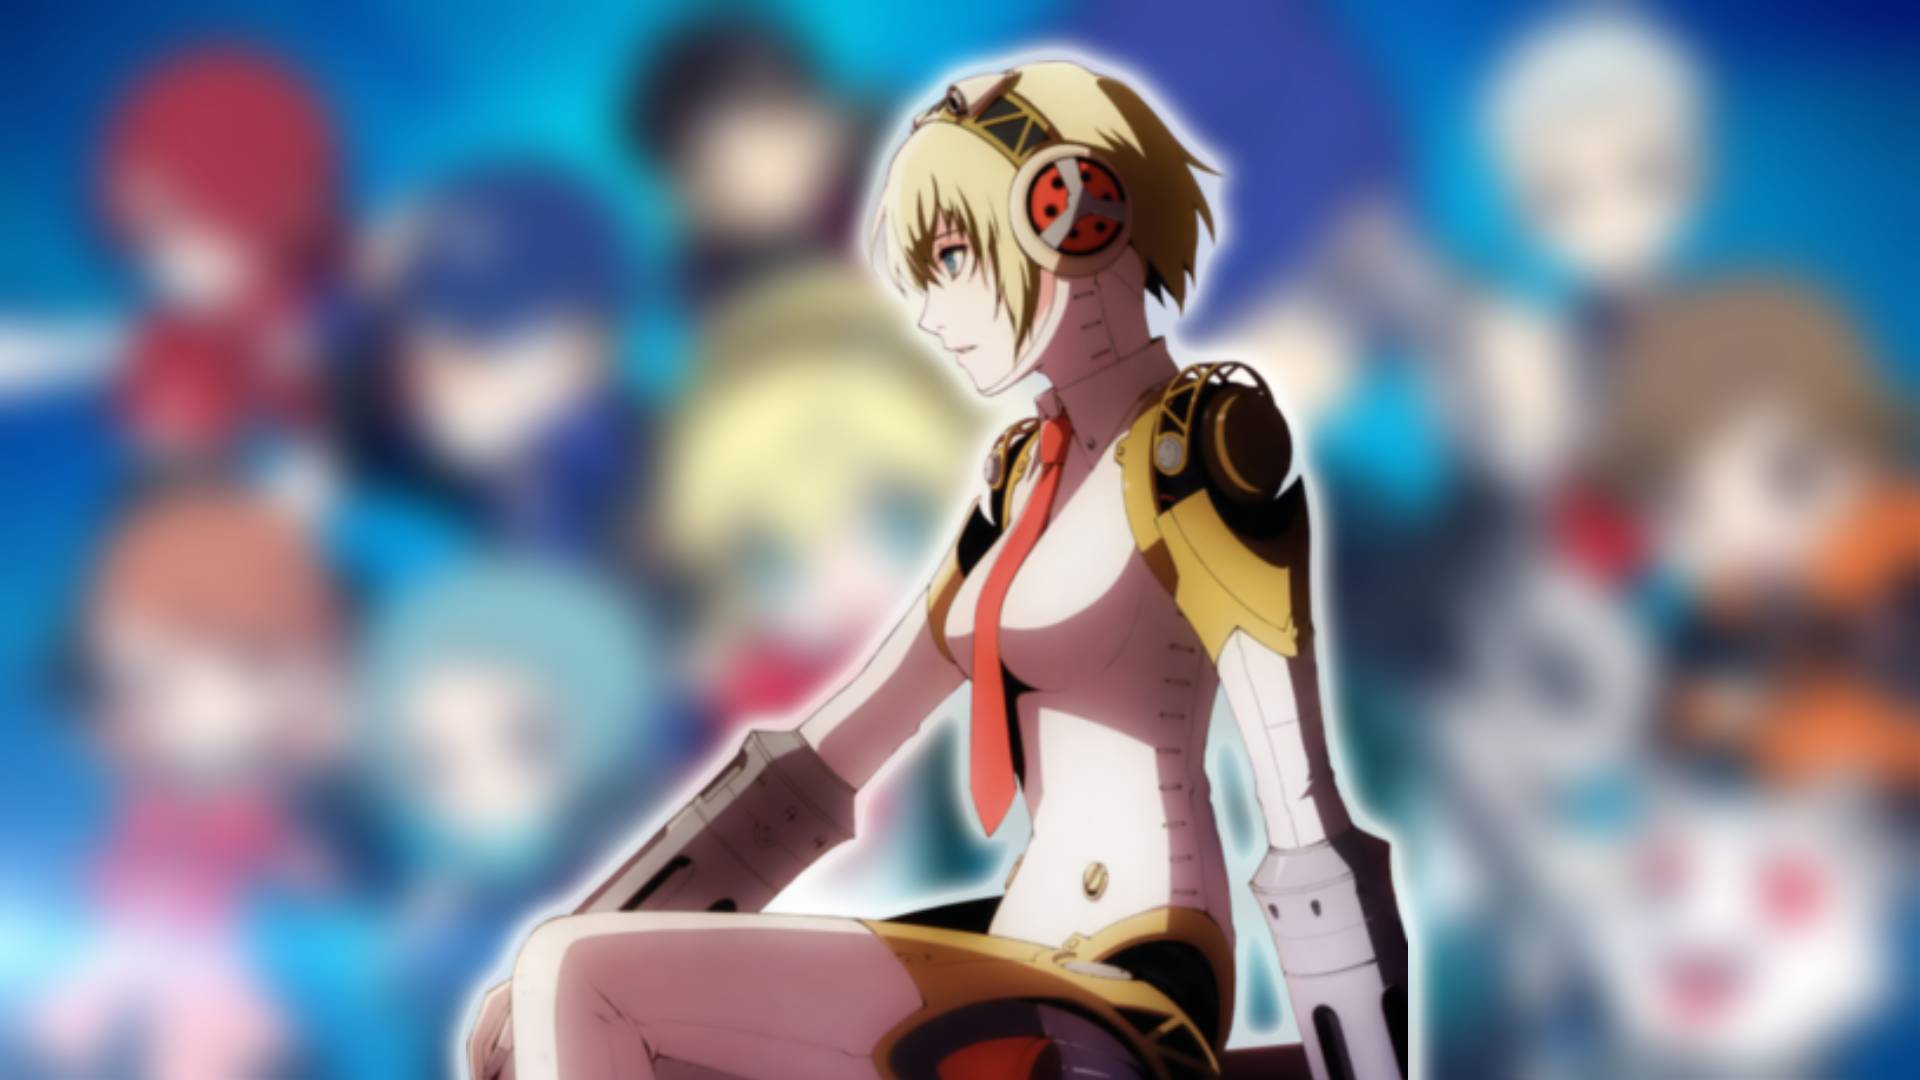 Persona 3 characters: Aigis from Persona 3 Portable are visible